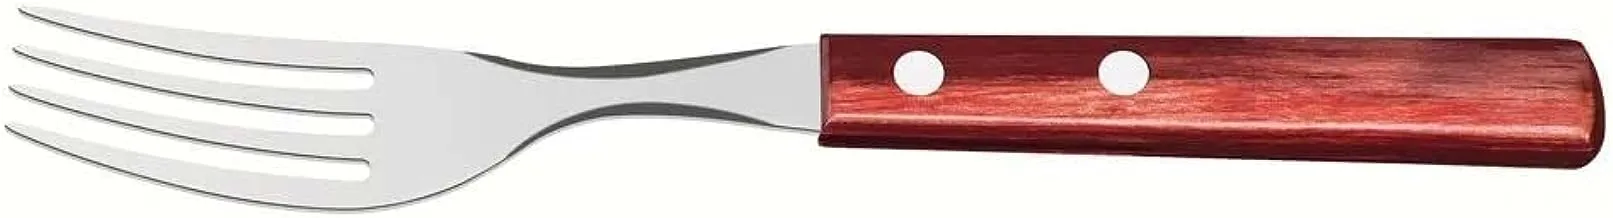 Tramontina Polywood 10 Inches Cooks Knife with Stainless Steel Blade and Dishwasher Safe Treated Handle